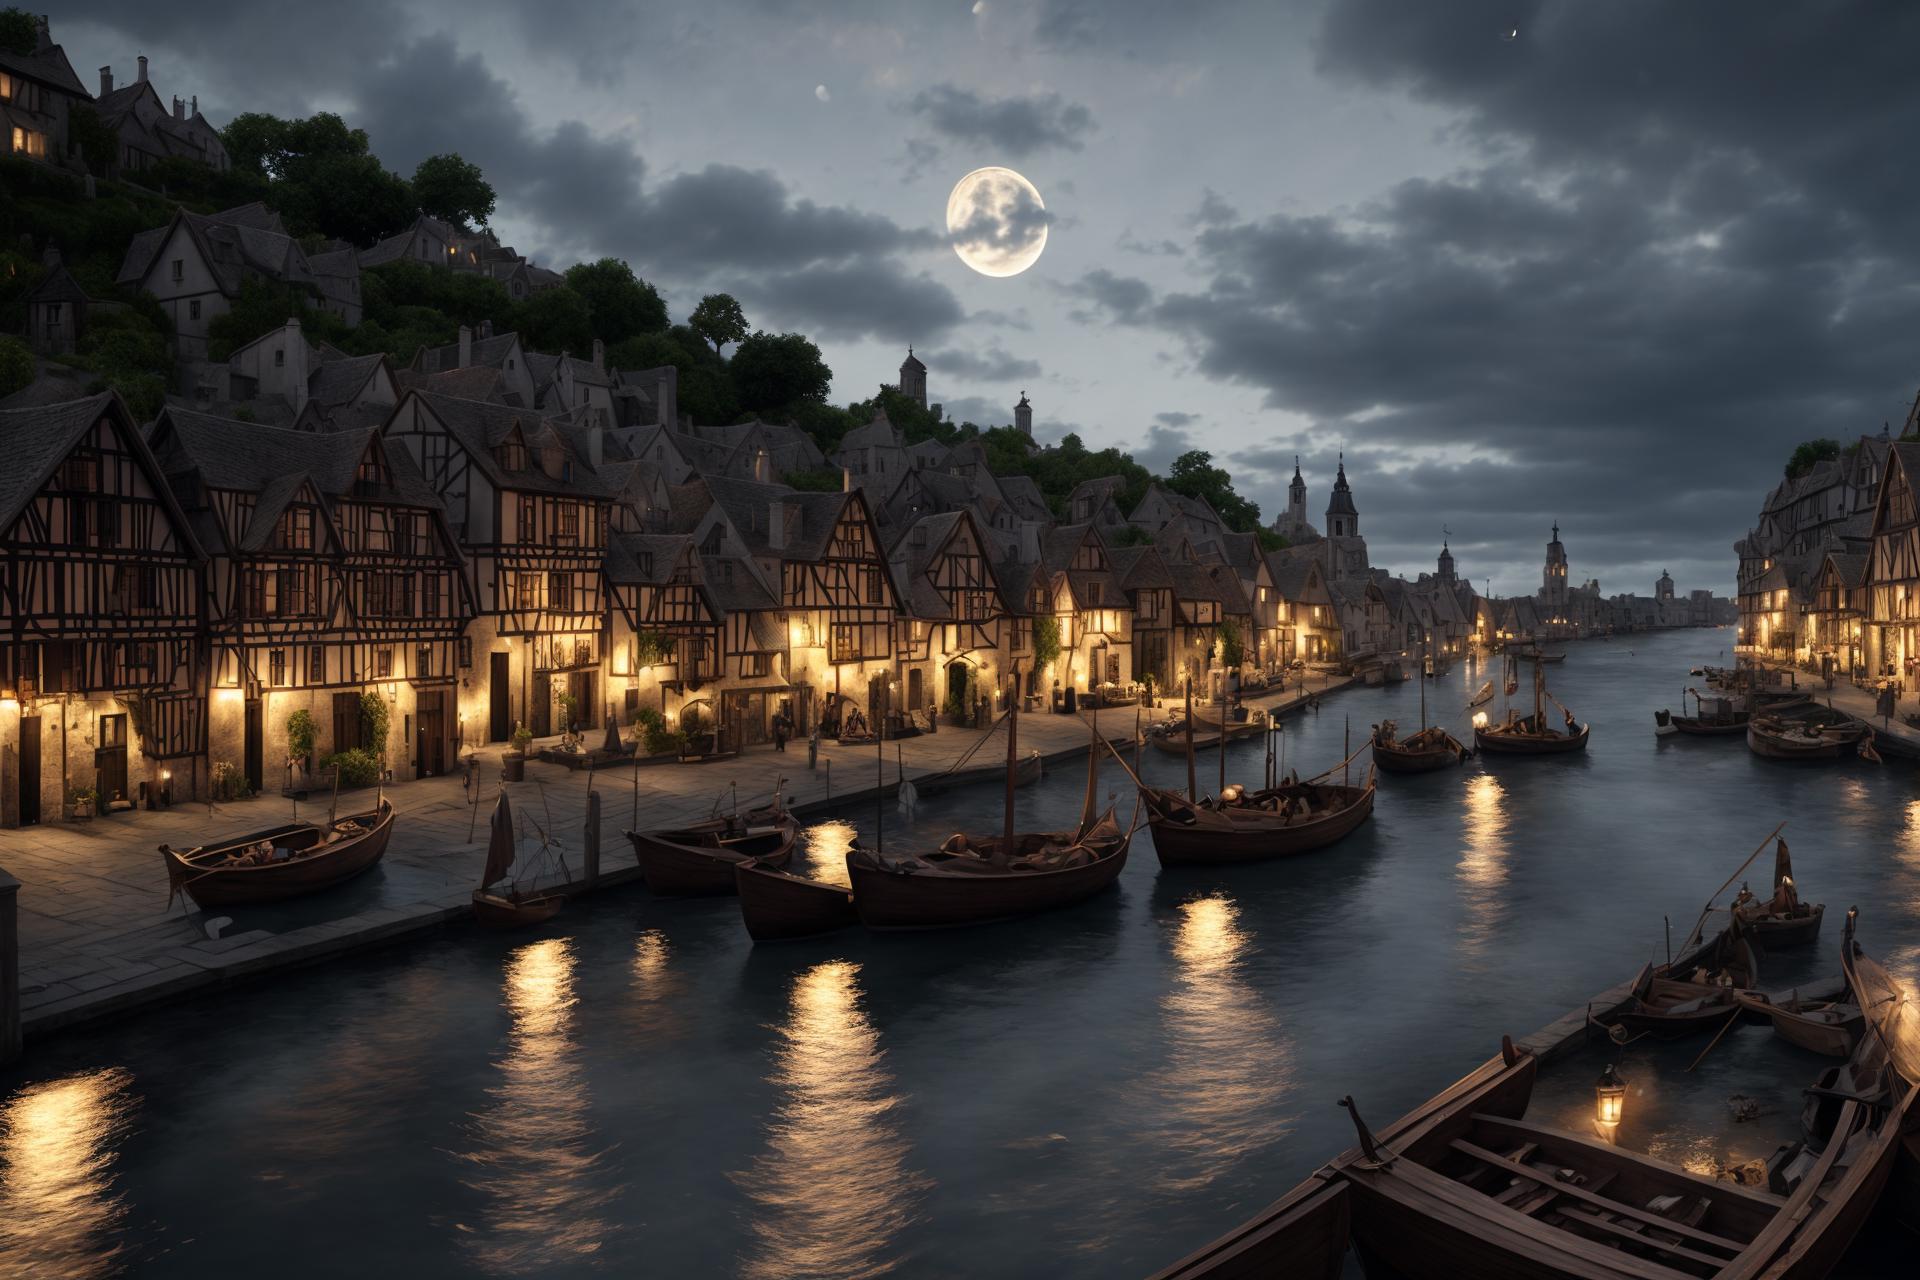 An Artistic rendering of a town with a moon and many boats in the water.